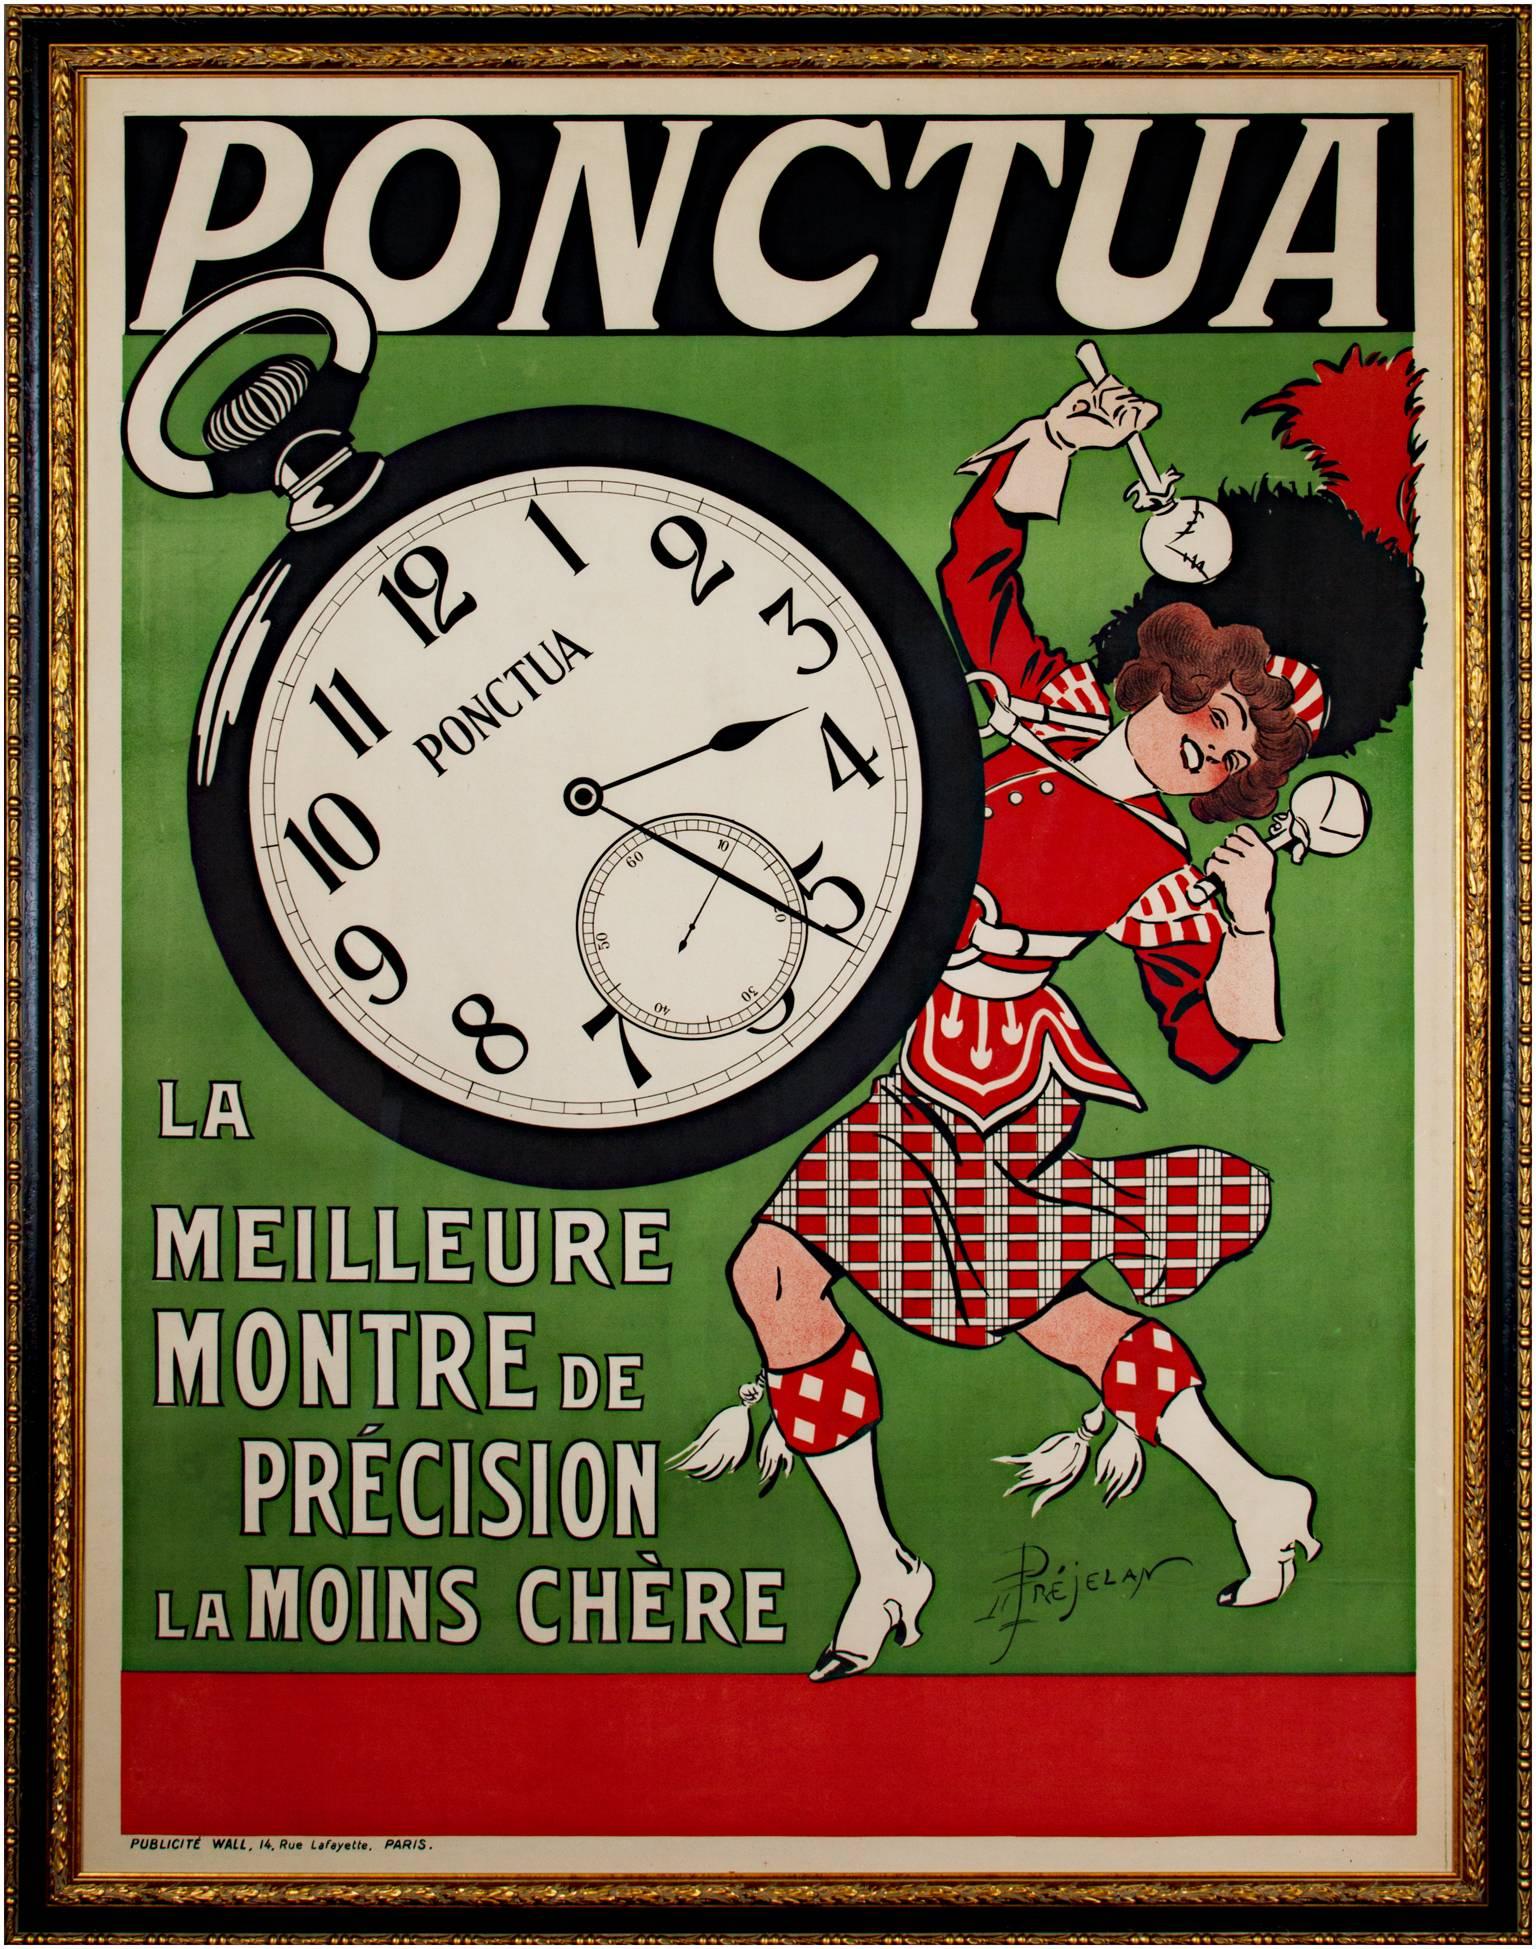 Original color lithograph poster by Rene Prejelan.

Ponctua (The best and least expensive precision watch), 1910.
A fine watch at a fine price- and the Scottish drum-majorette certainly seems enthusiastic to agree.
La belle epoque art nouveau French